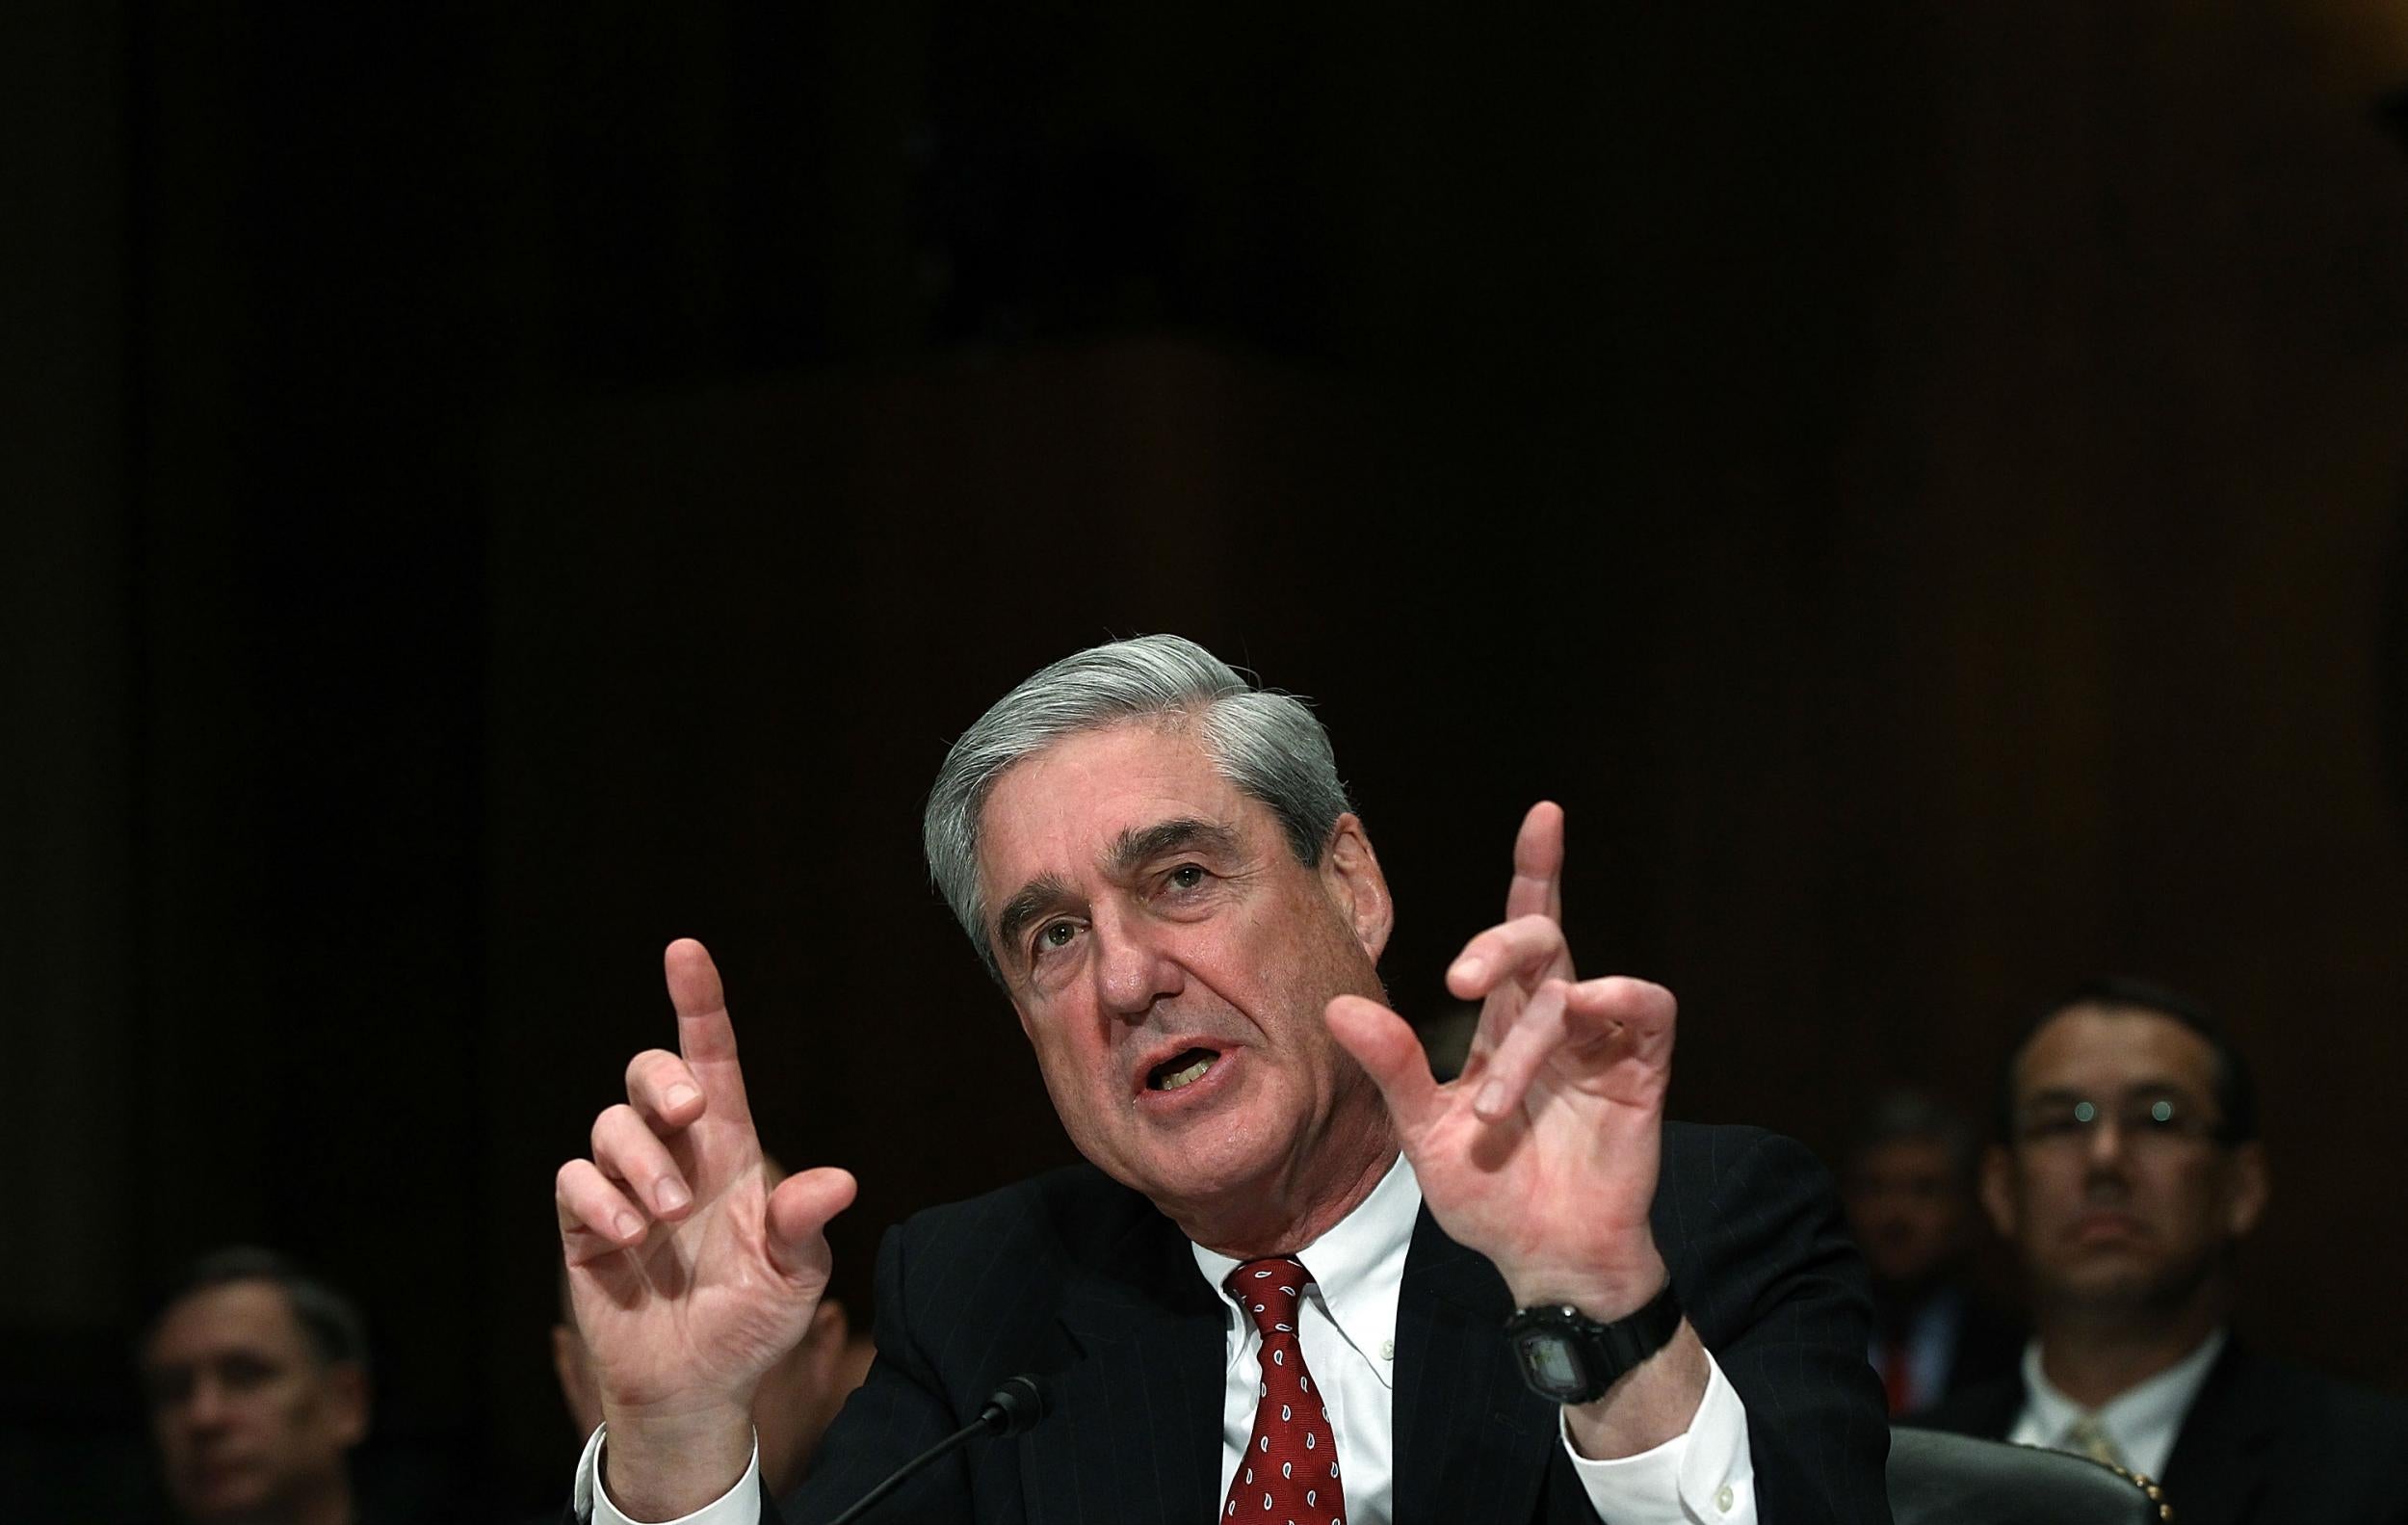 Trump-Russia probe: Robert Mueller agrees to testify before Congress